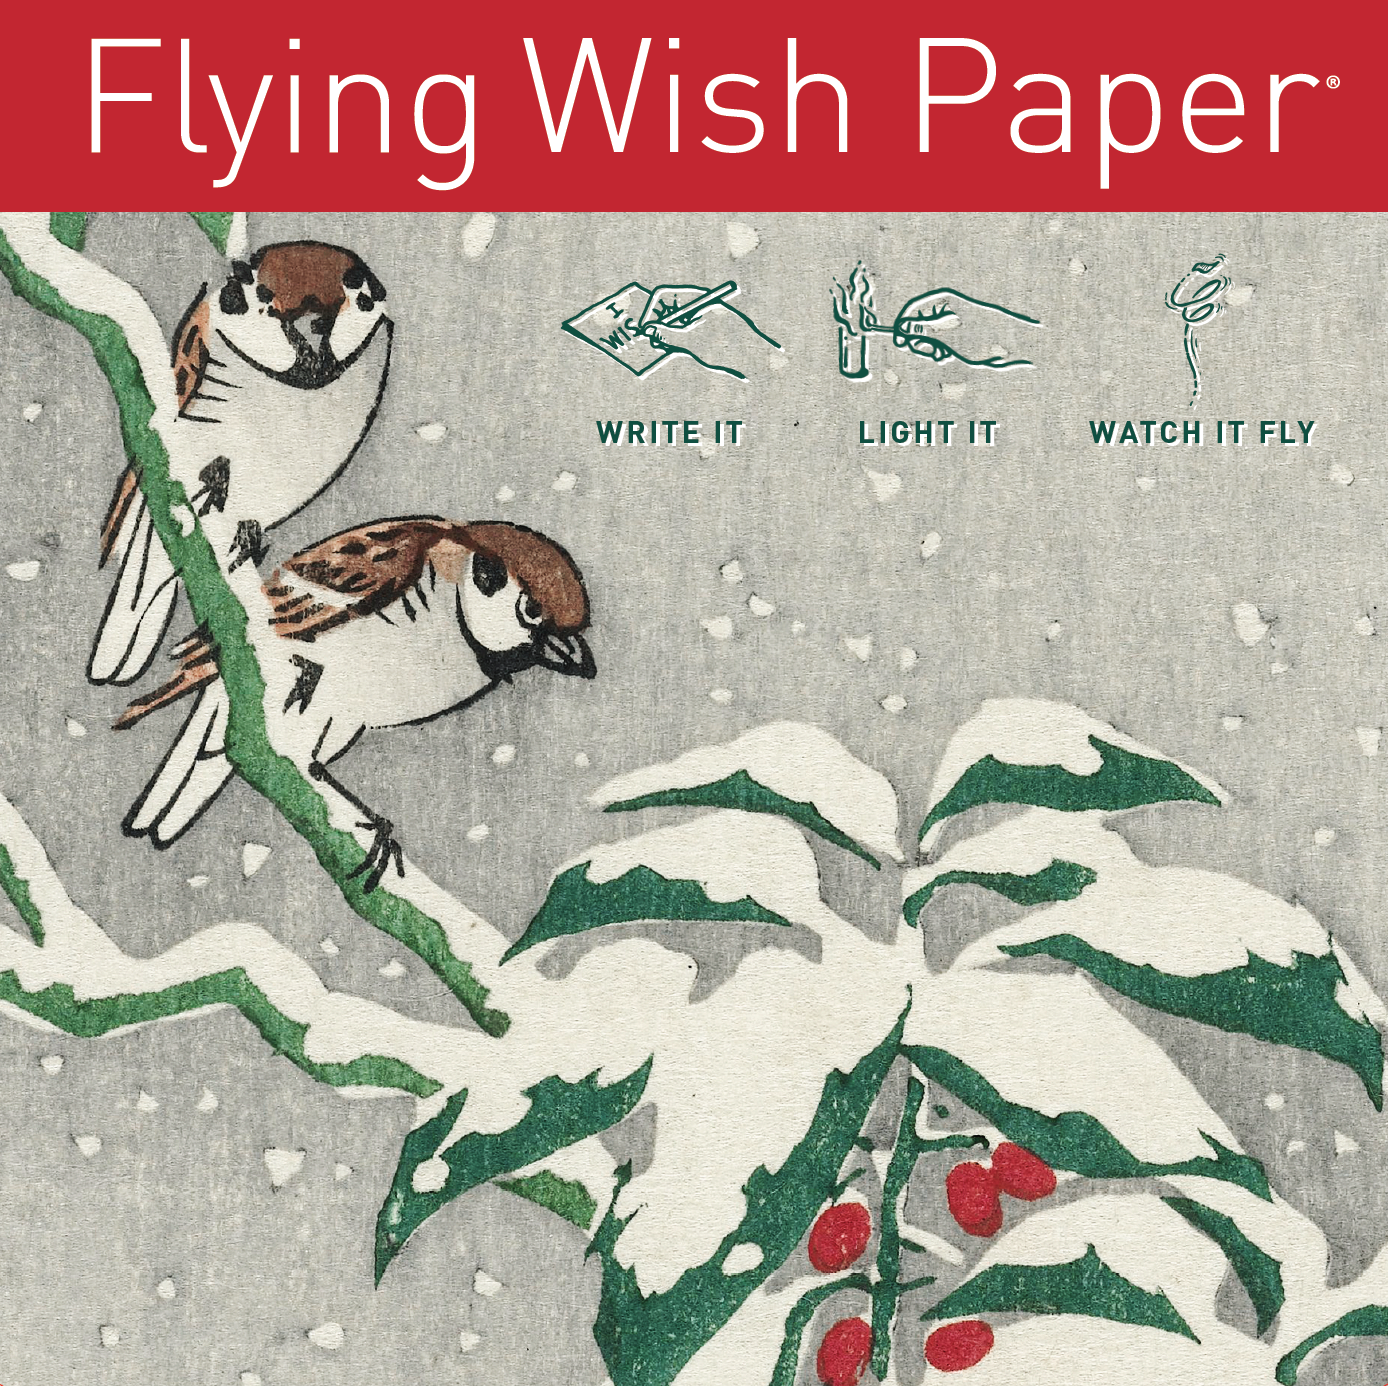 Flying Wishing Paper - What is it and how do I use it?